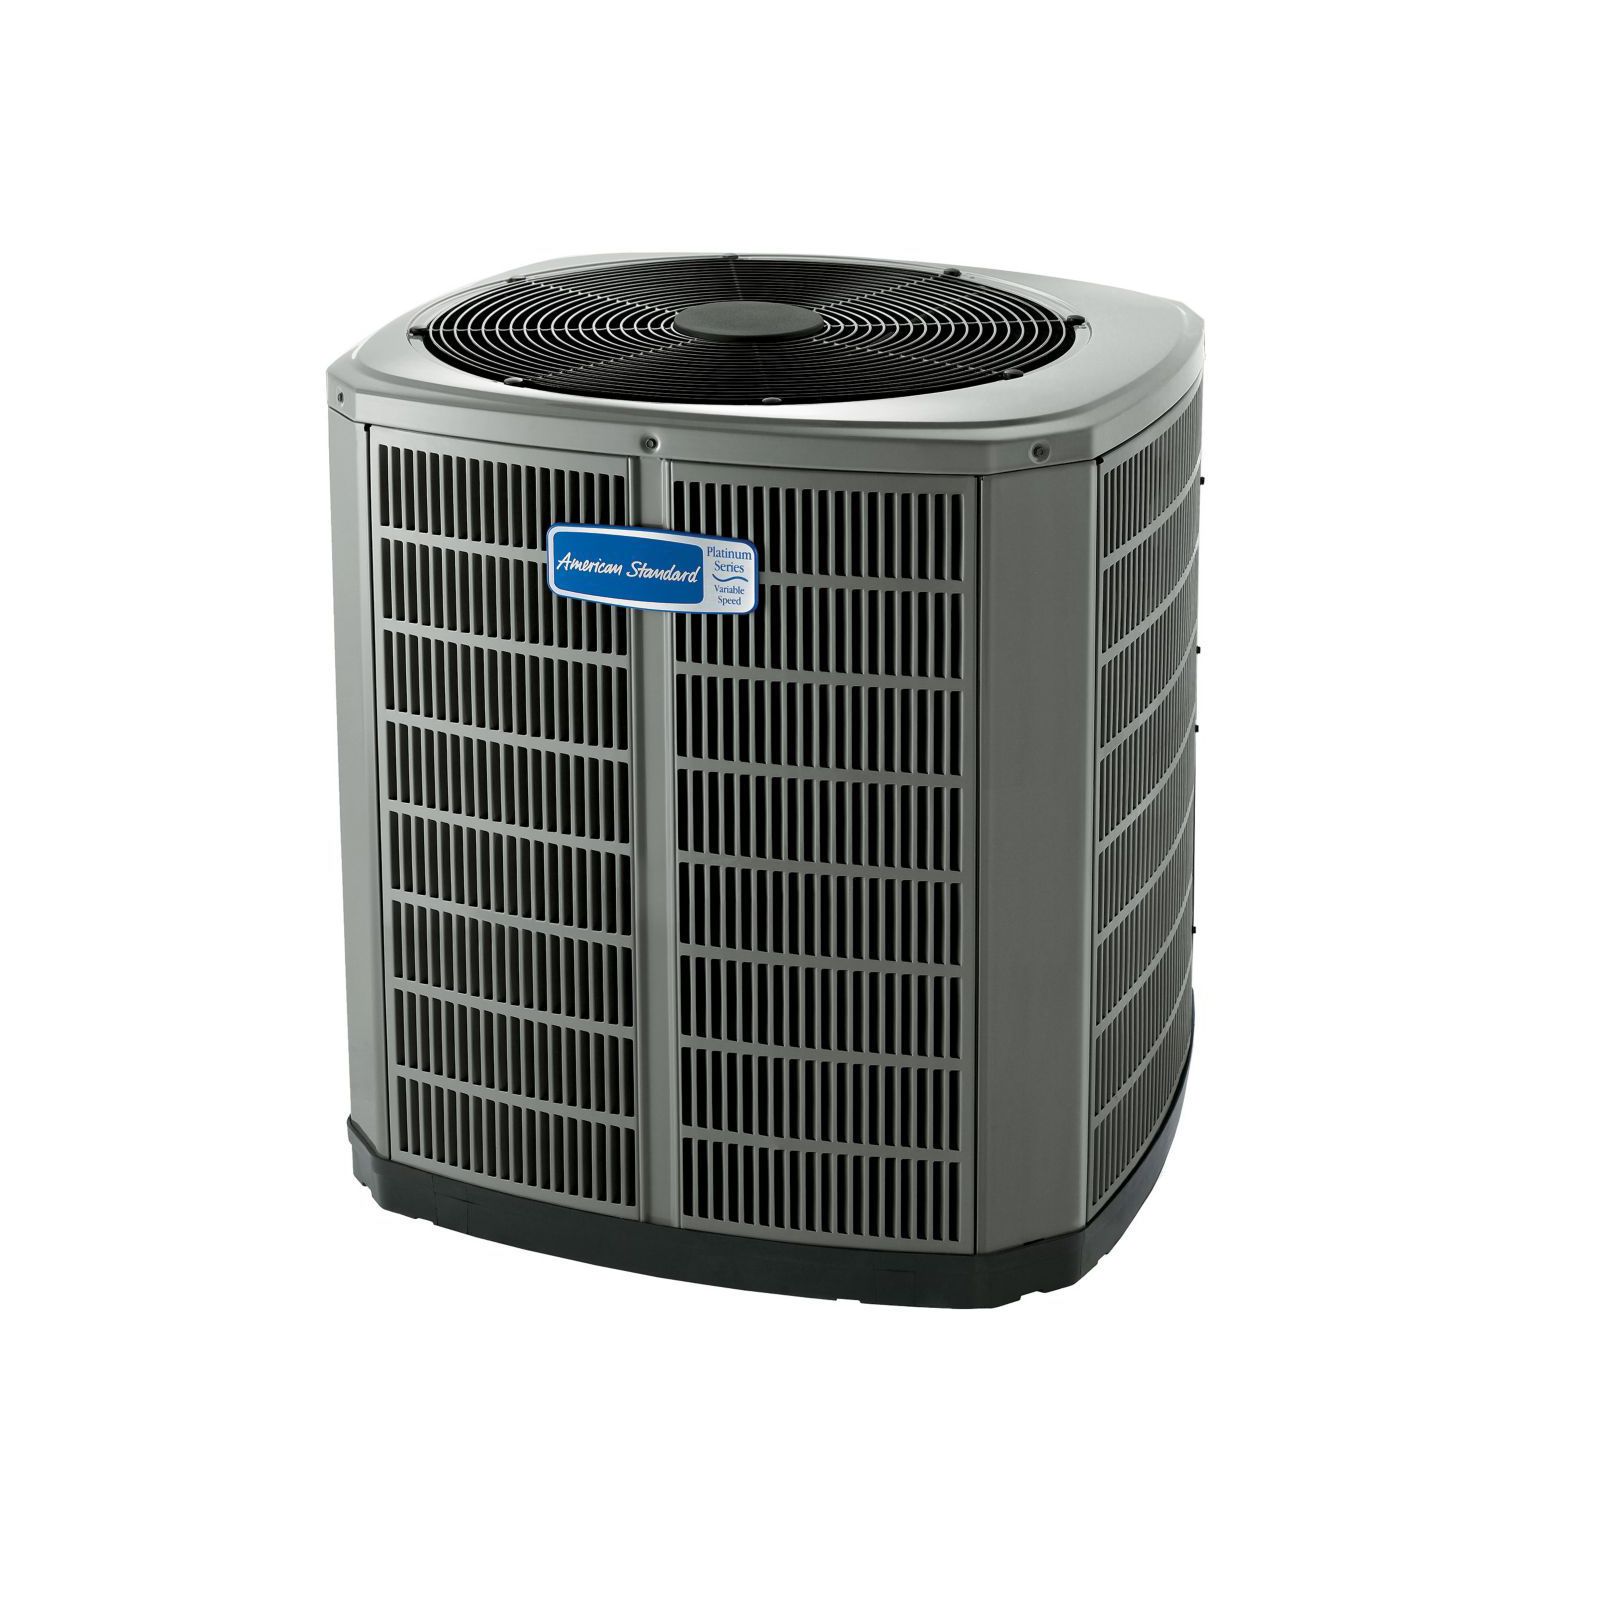 American Standard Heating & Cooling 3 Ton Air Conditioner 1690076